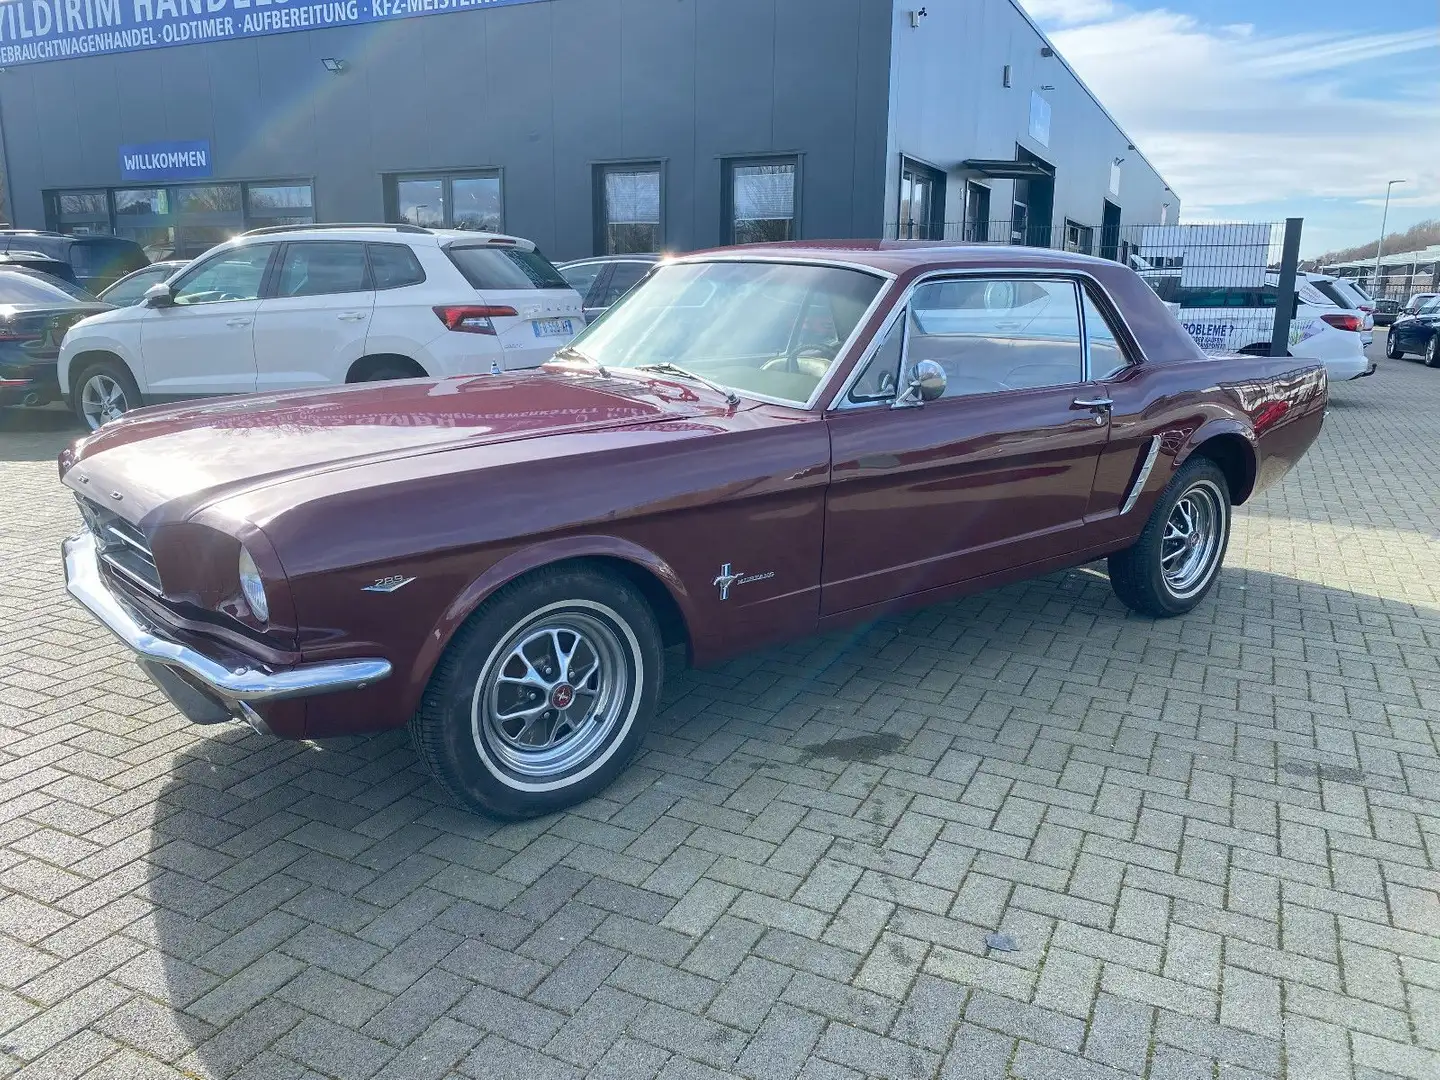 Ford Mustang C-Code 289 cui 2V,4.7L V8, C4 GETRIEBE Red - 2